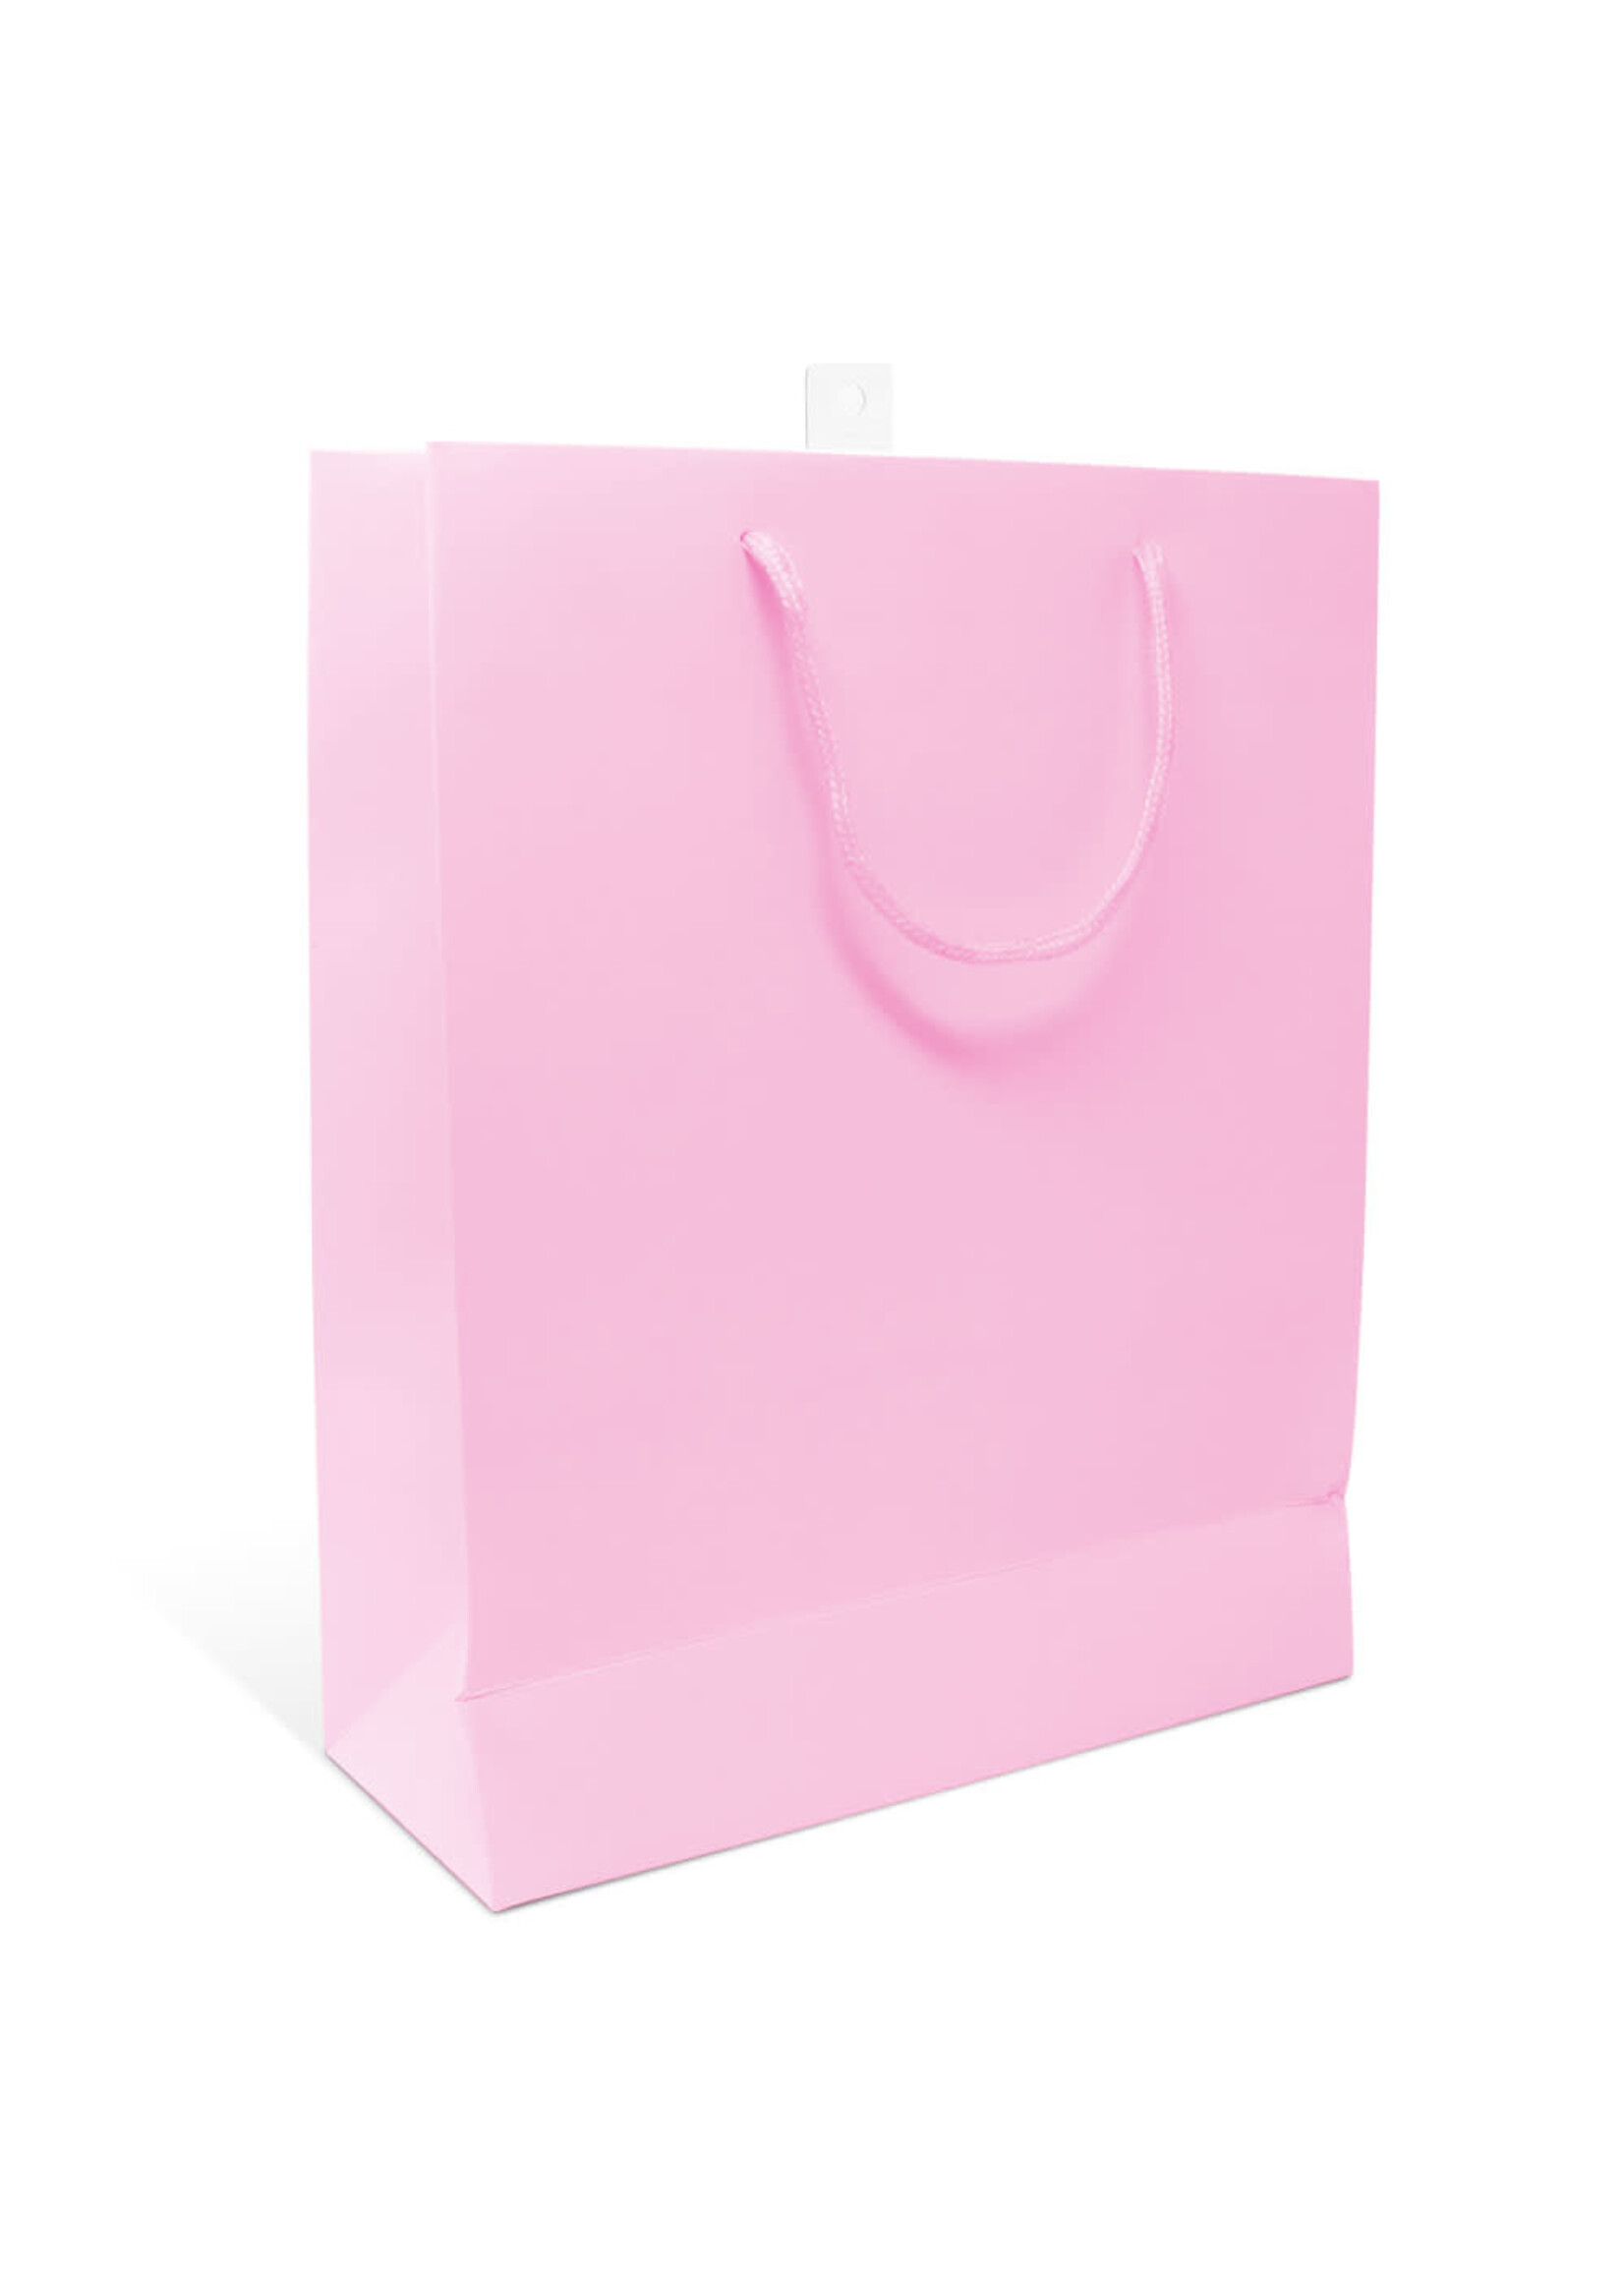 SOLID BABY PINK GIFT BAGS MEDIUM 10.25" X 12.5" X 4"